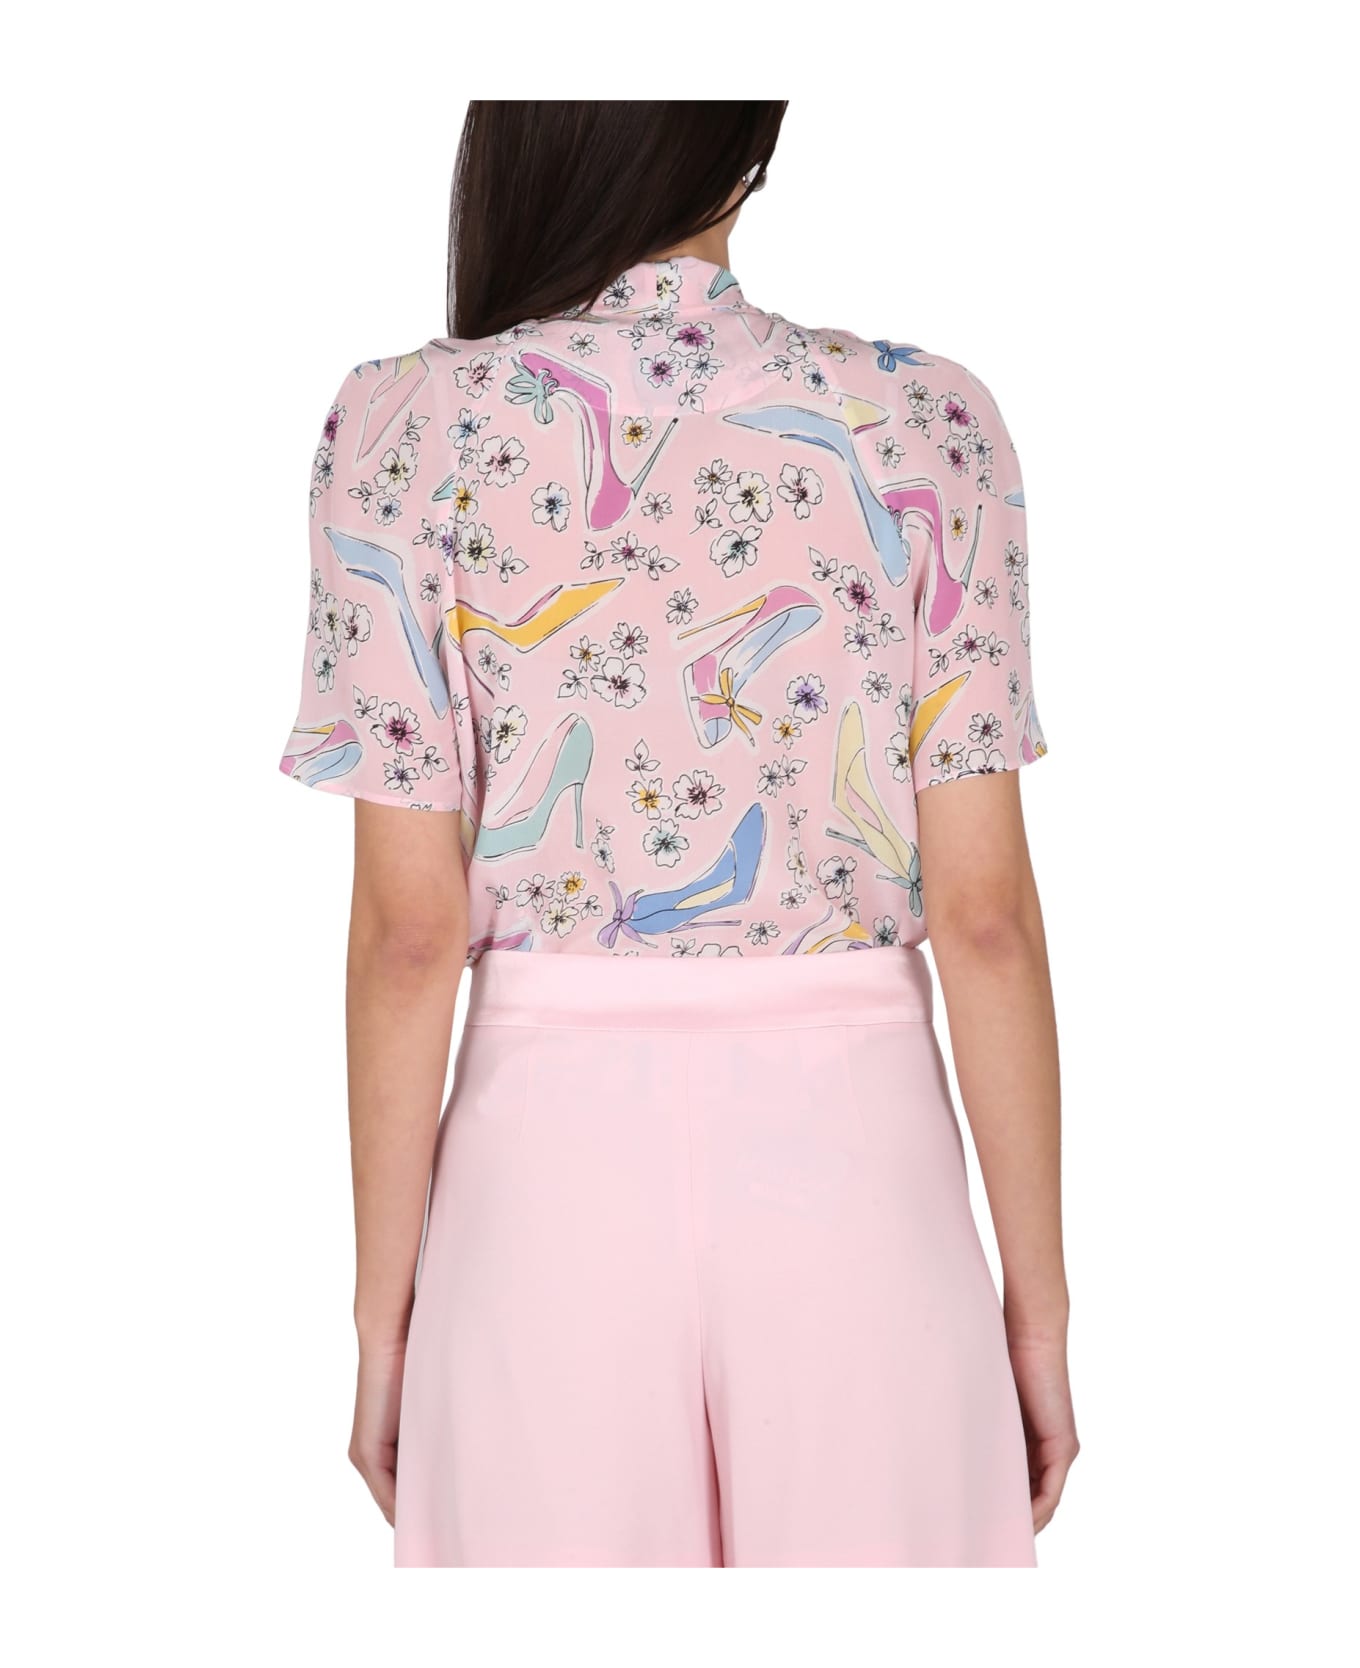 Boutique Moschino Heels And Flowers Shirt - ROSA